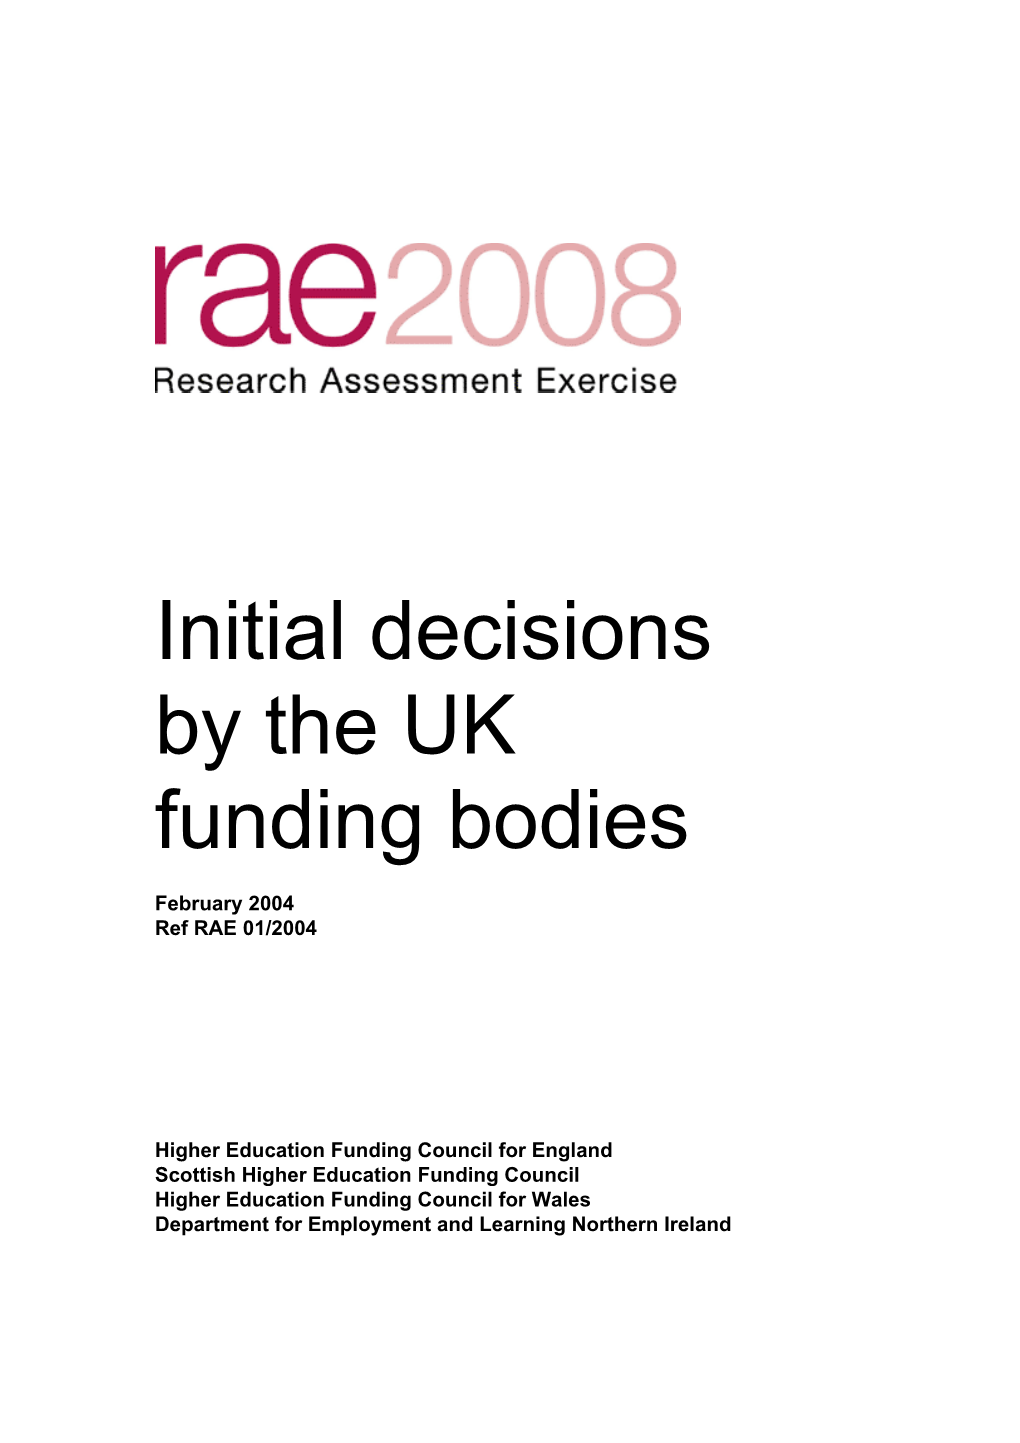 RAE 2008: Initial Decisions by the UK Funding Bodies